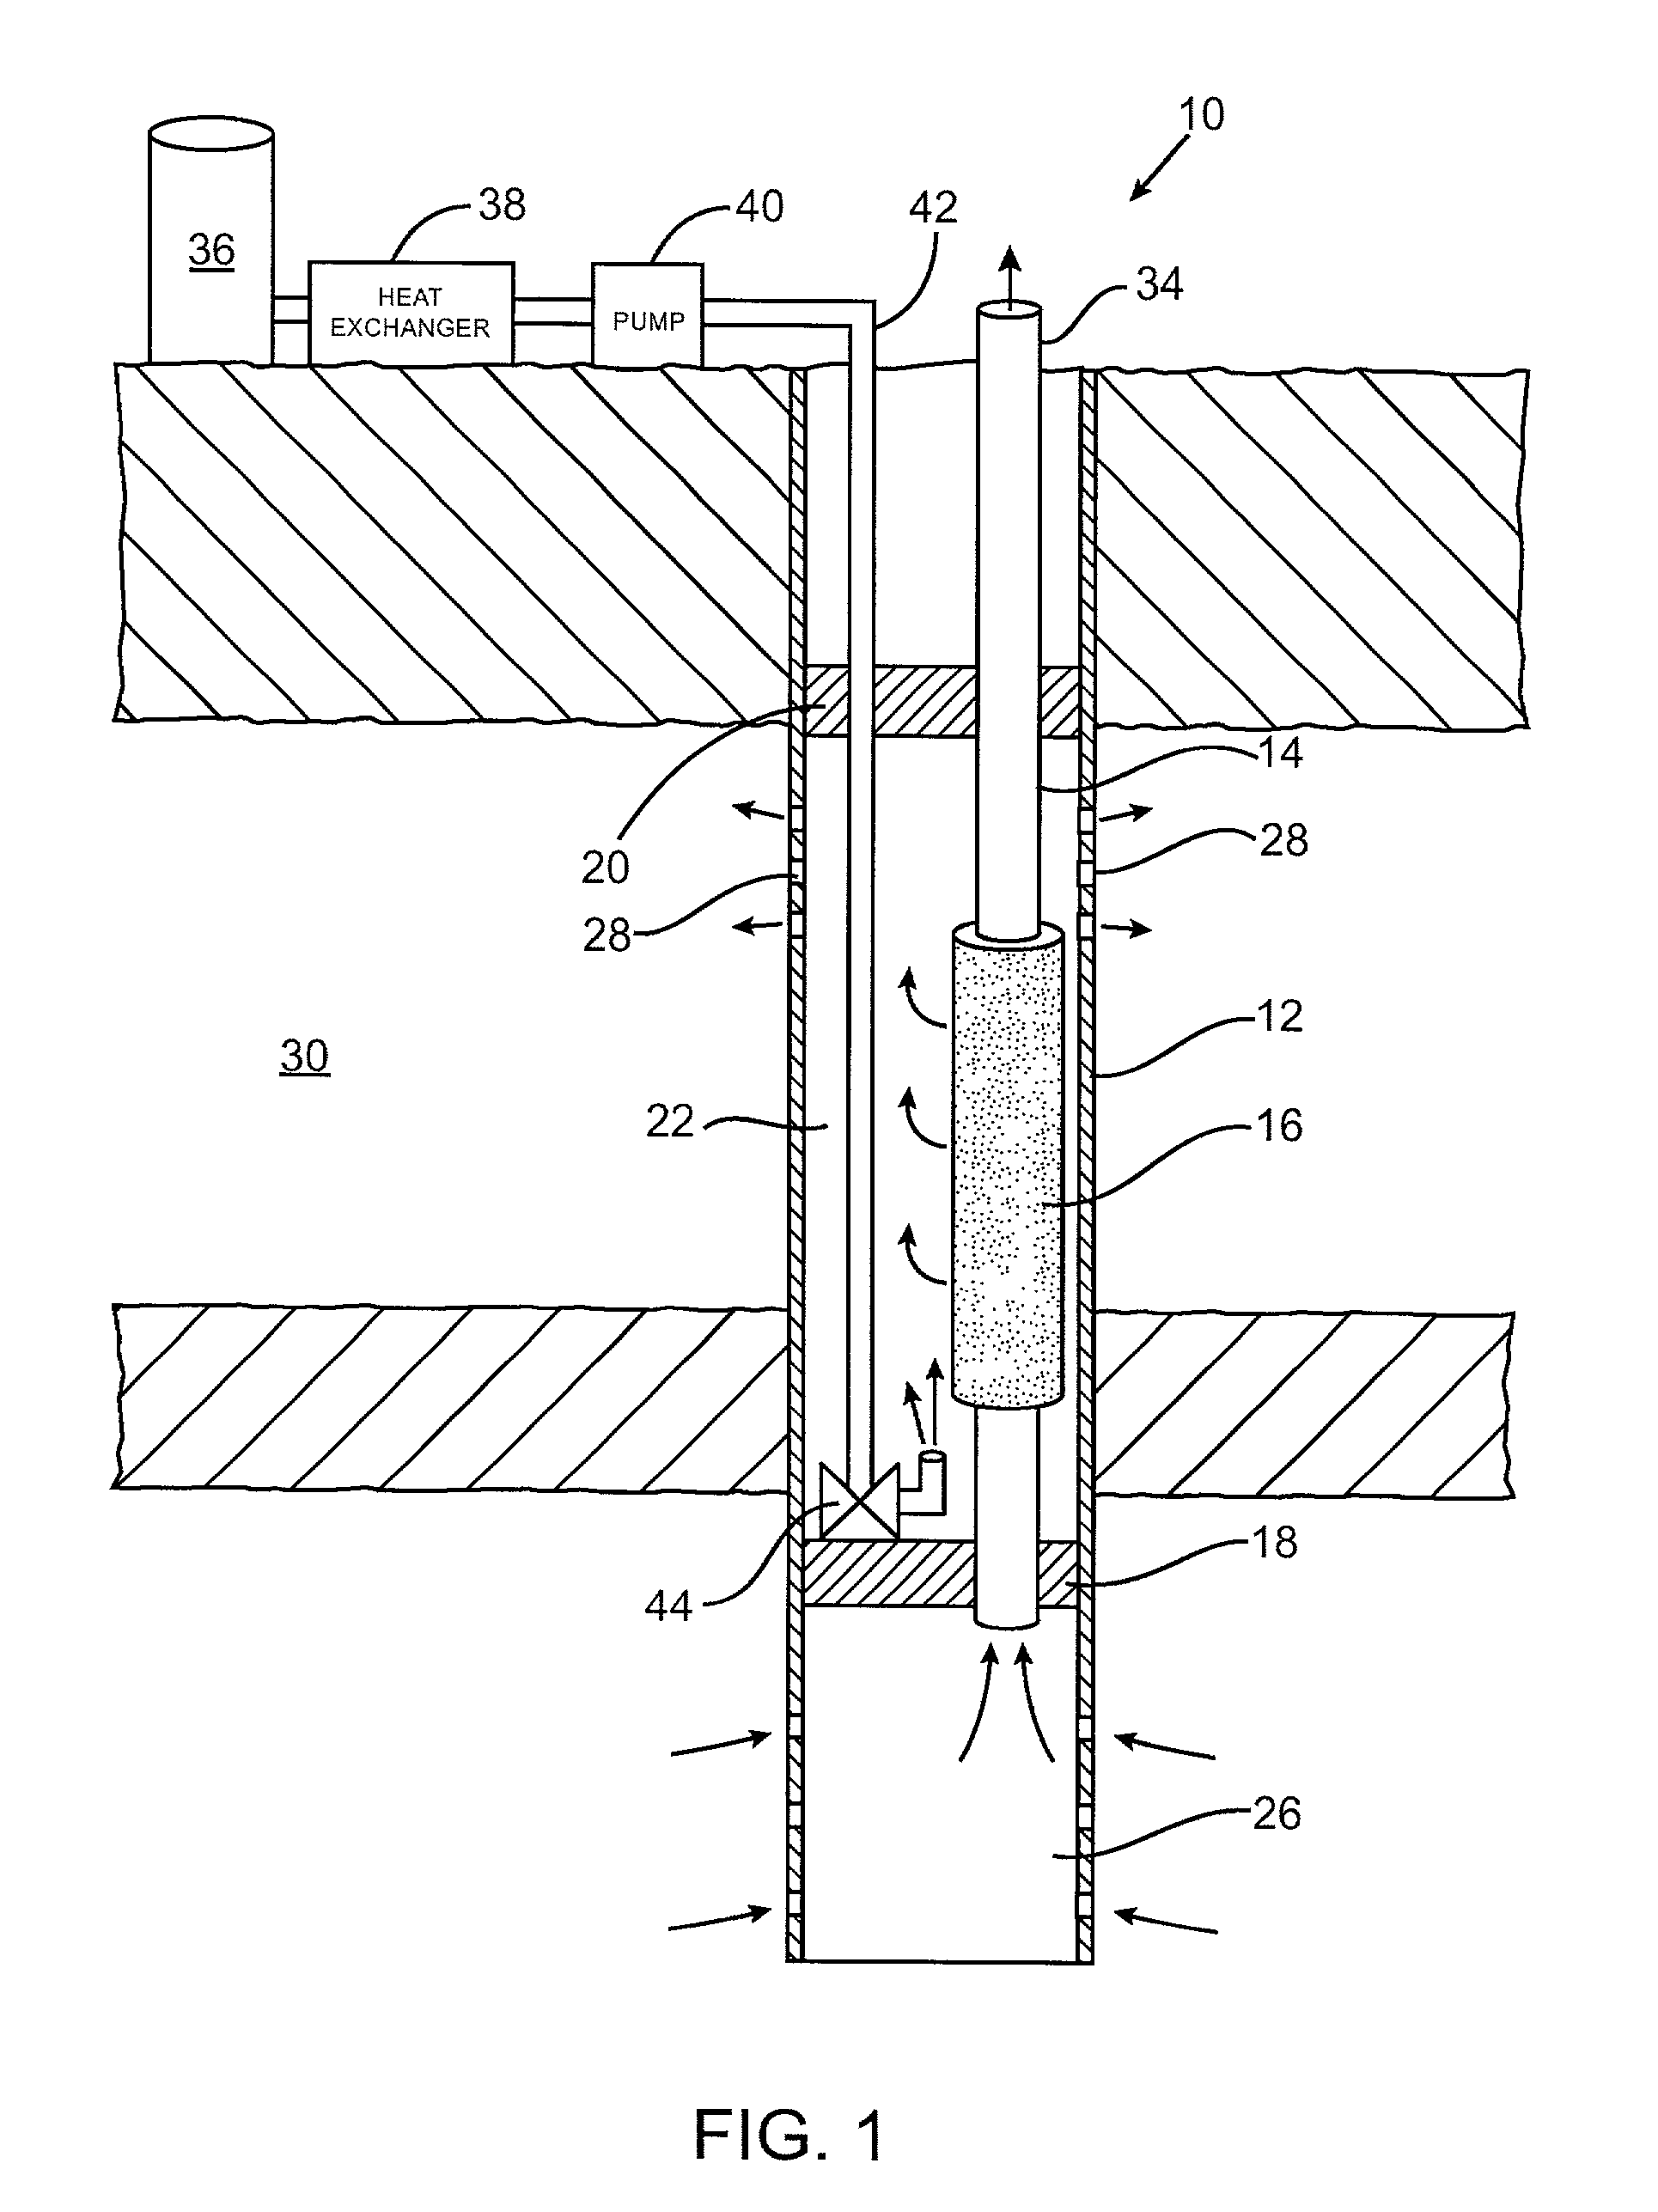 Downhole membrane separation system with sweep gas